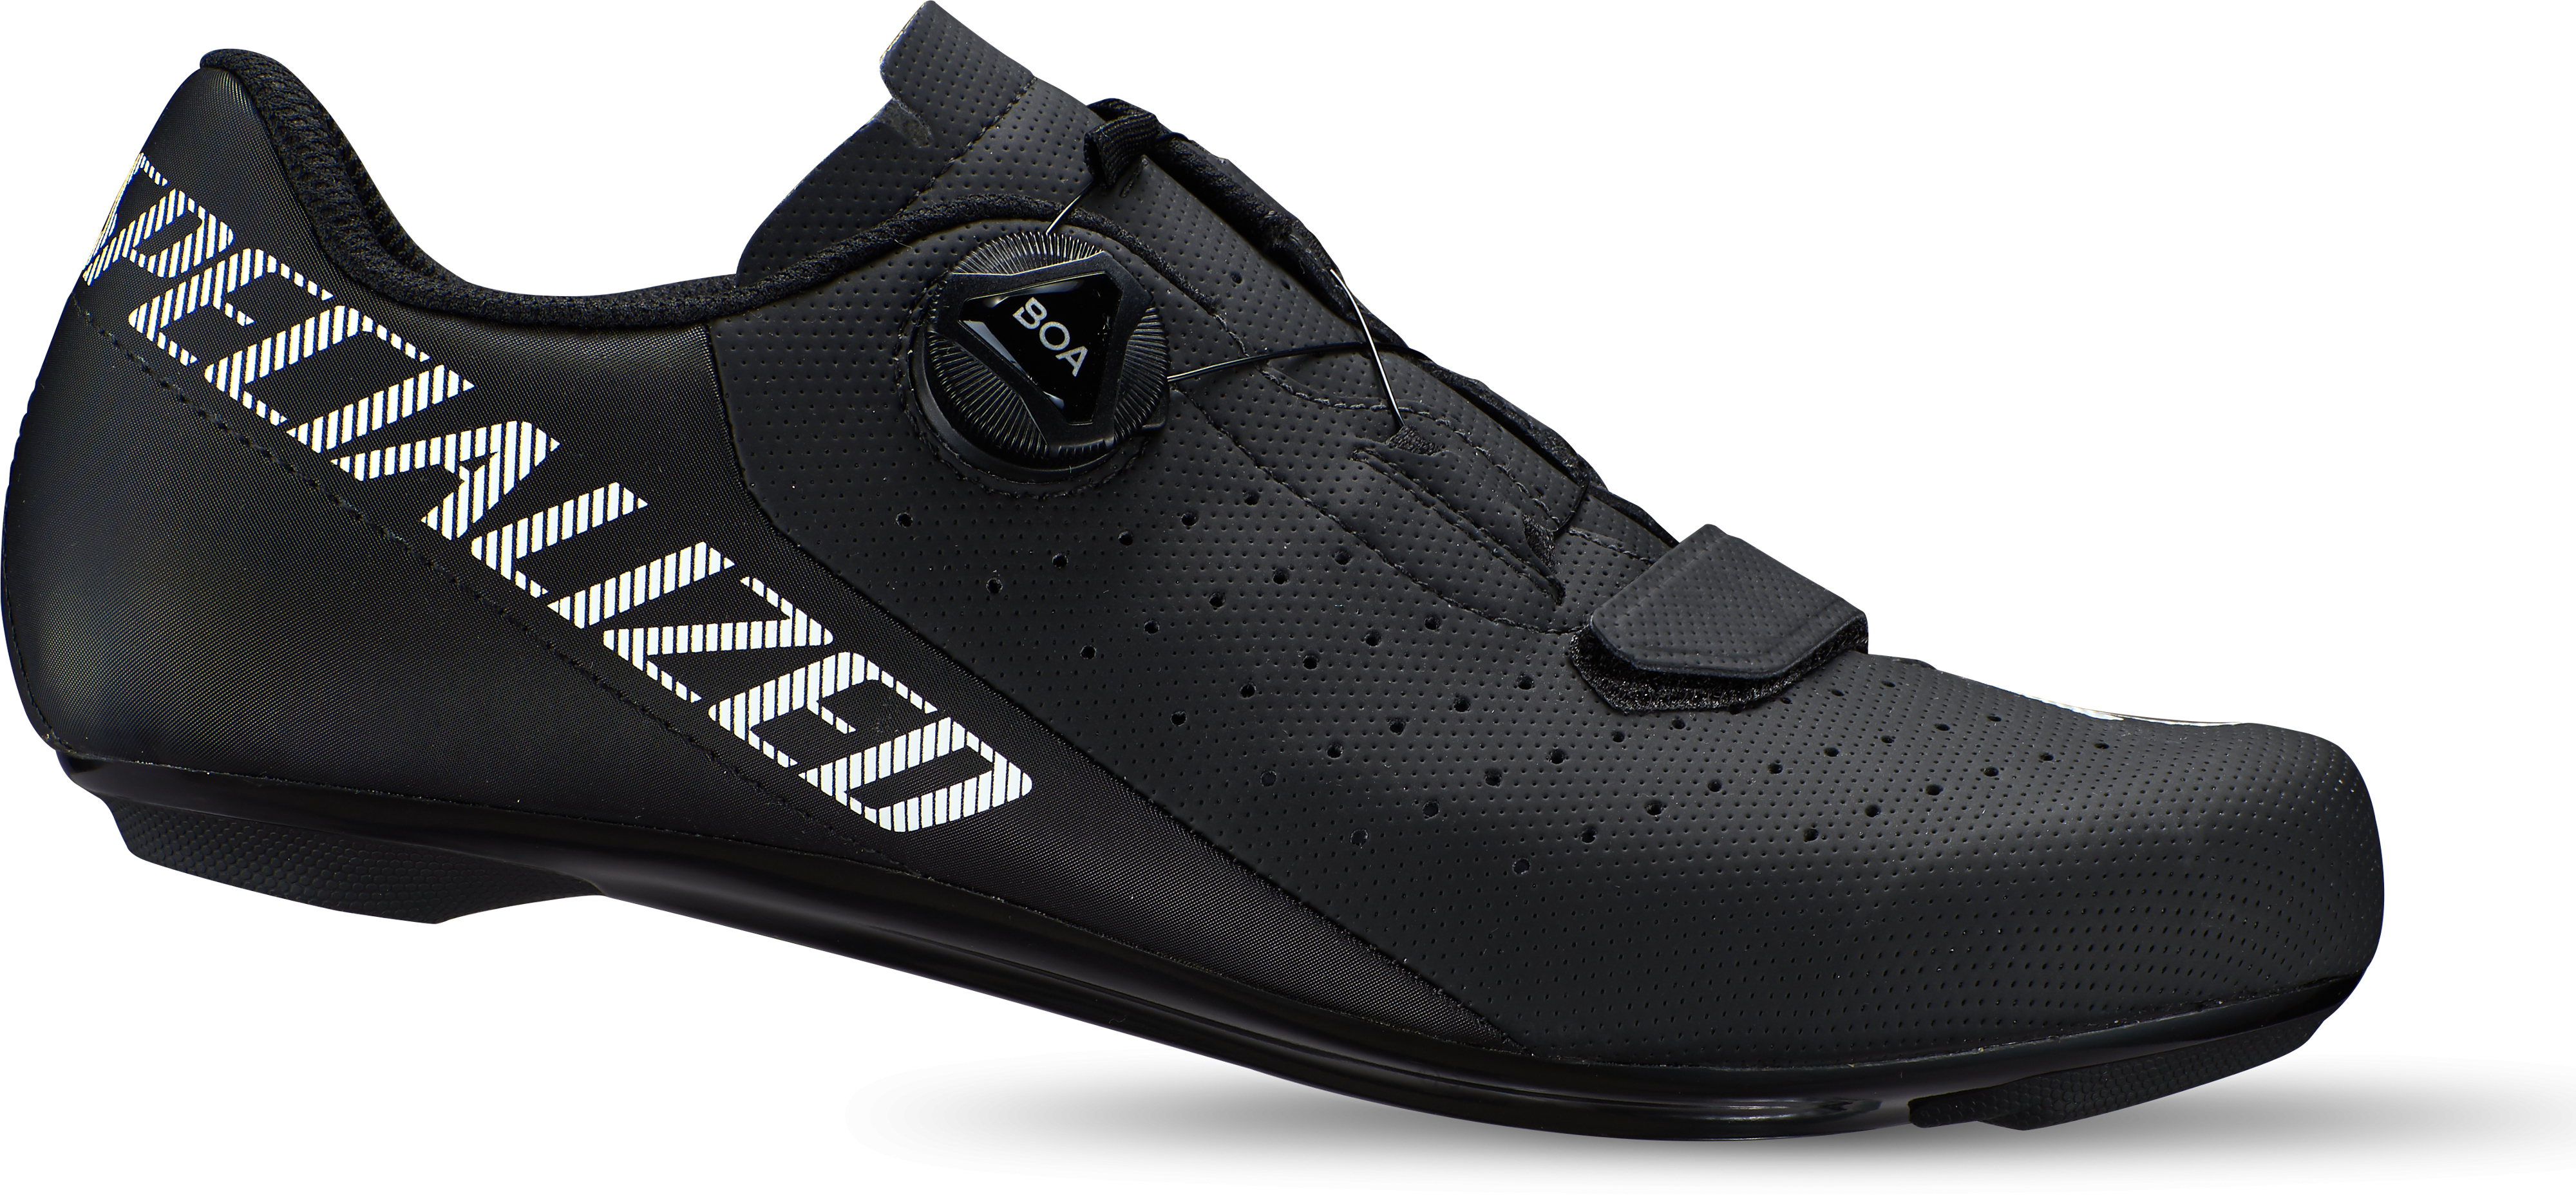 Specialized  Torch 1.0 Road Cycling Shoes  44 Black